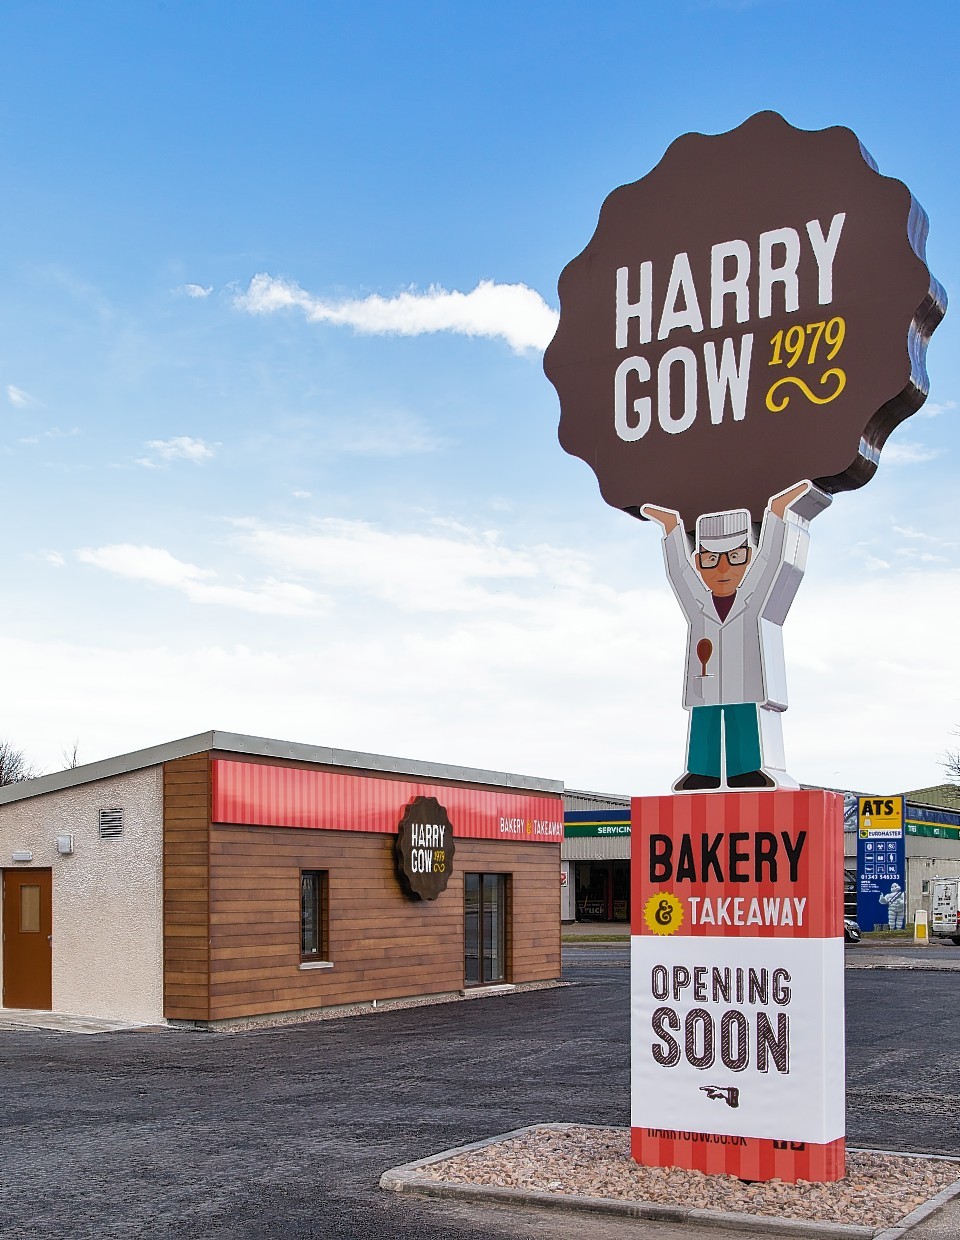 The new Harry Gow premises in Elgin which is due to open early March